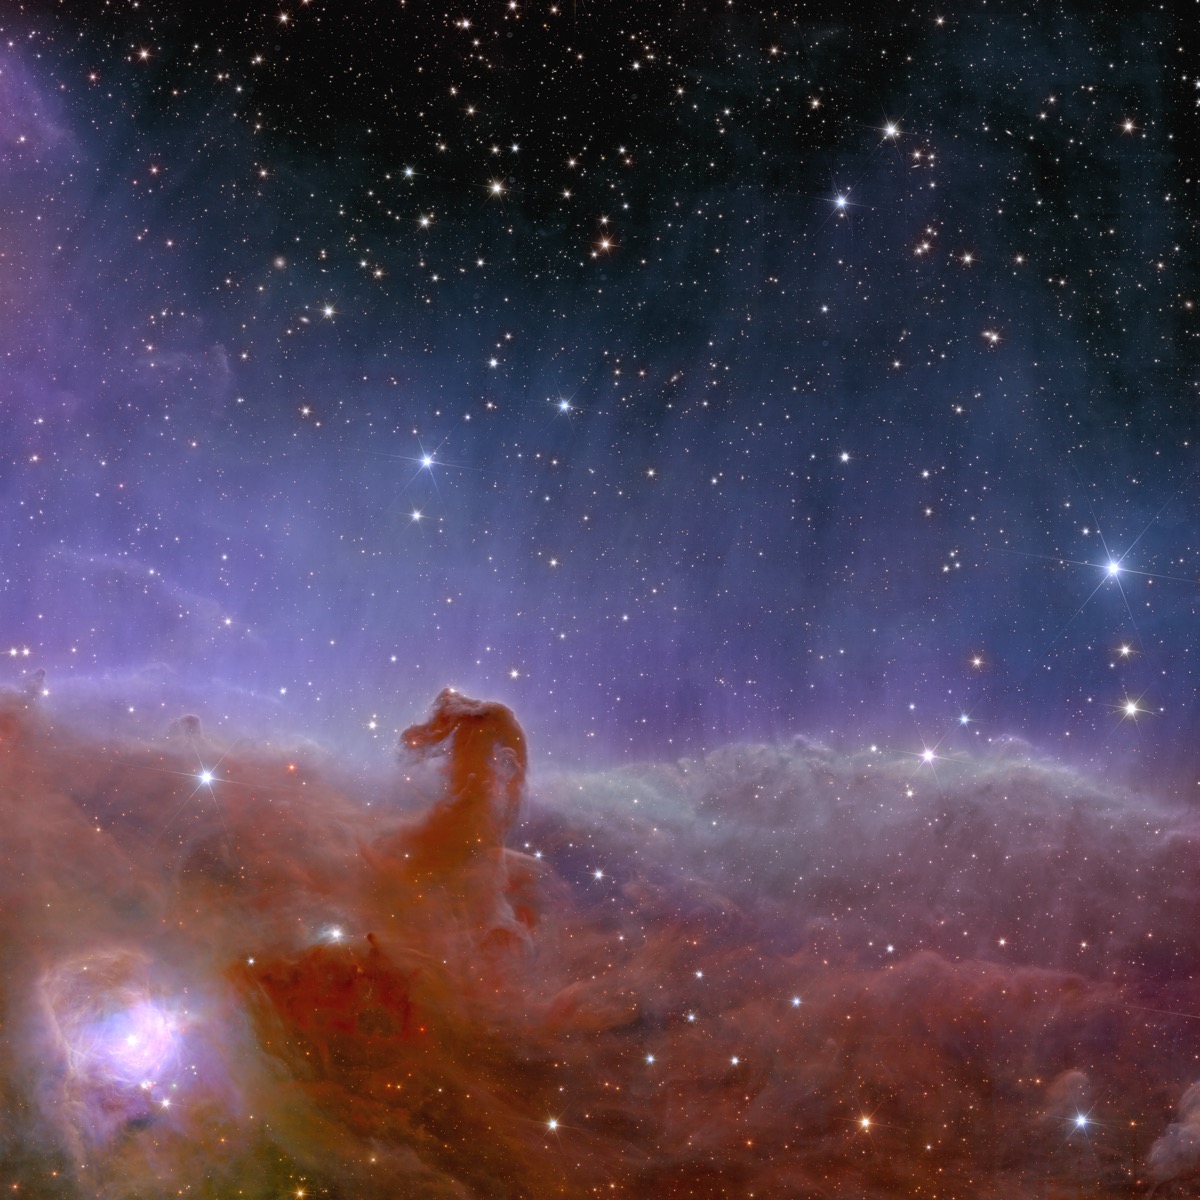 The Euclid image of the Horsehead Nebula, an iconic target for backyard astrophotographers and space telescopes alike. Credit: ESA.